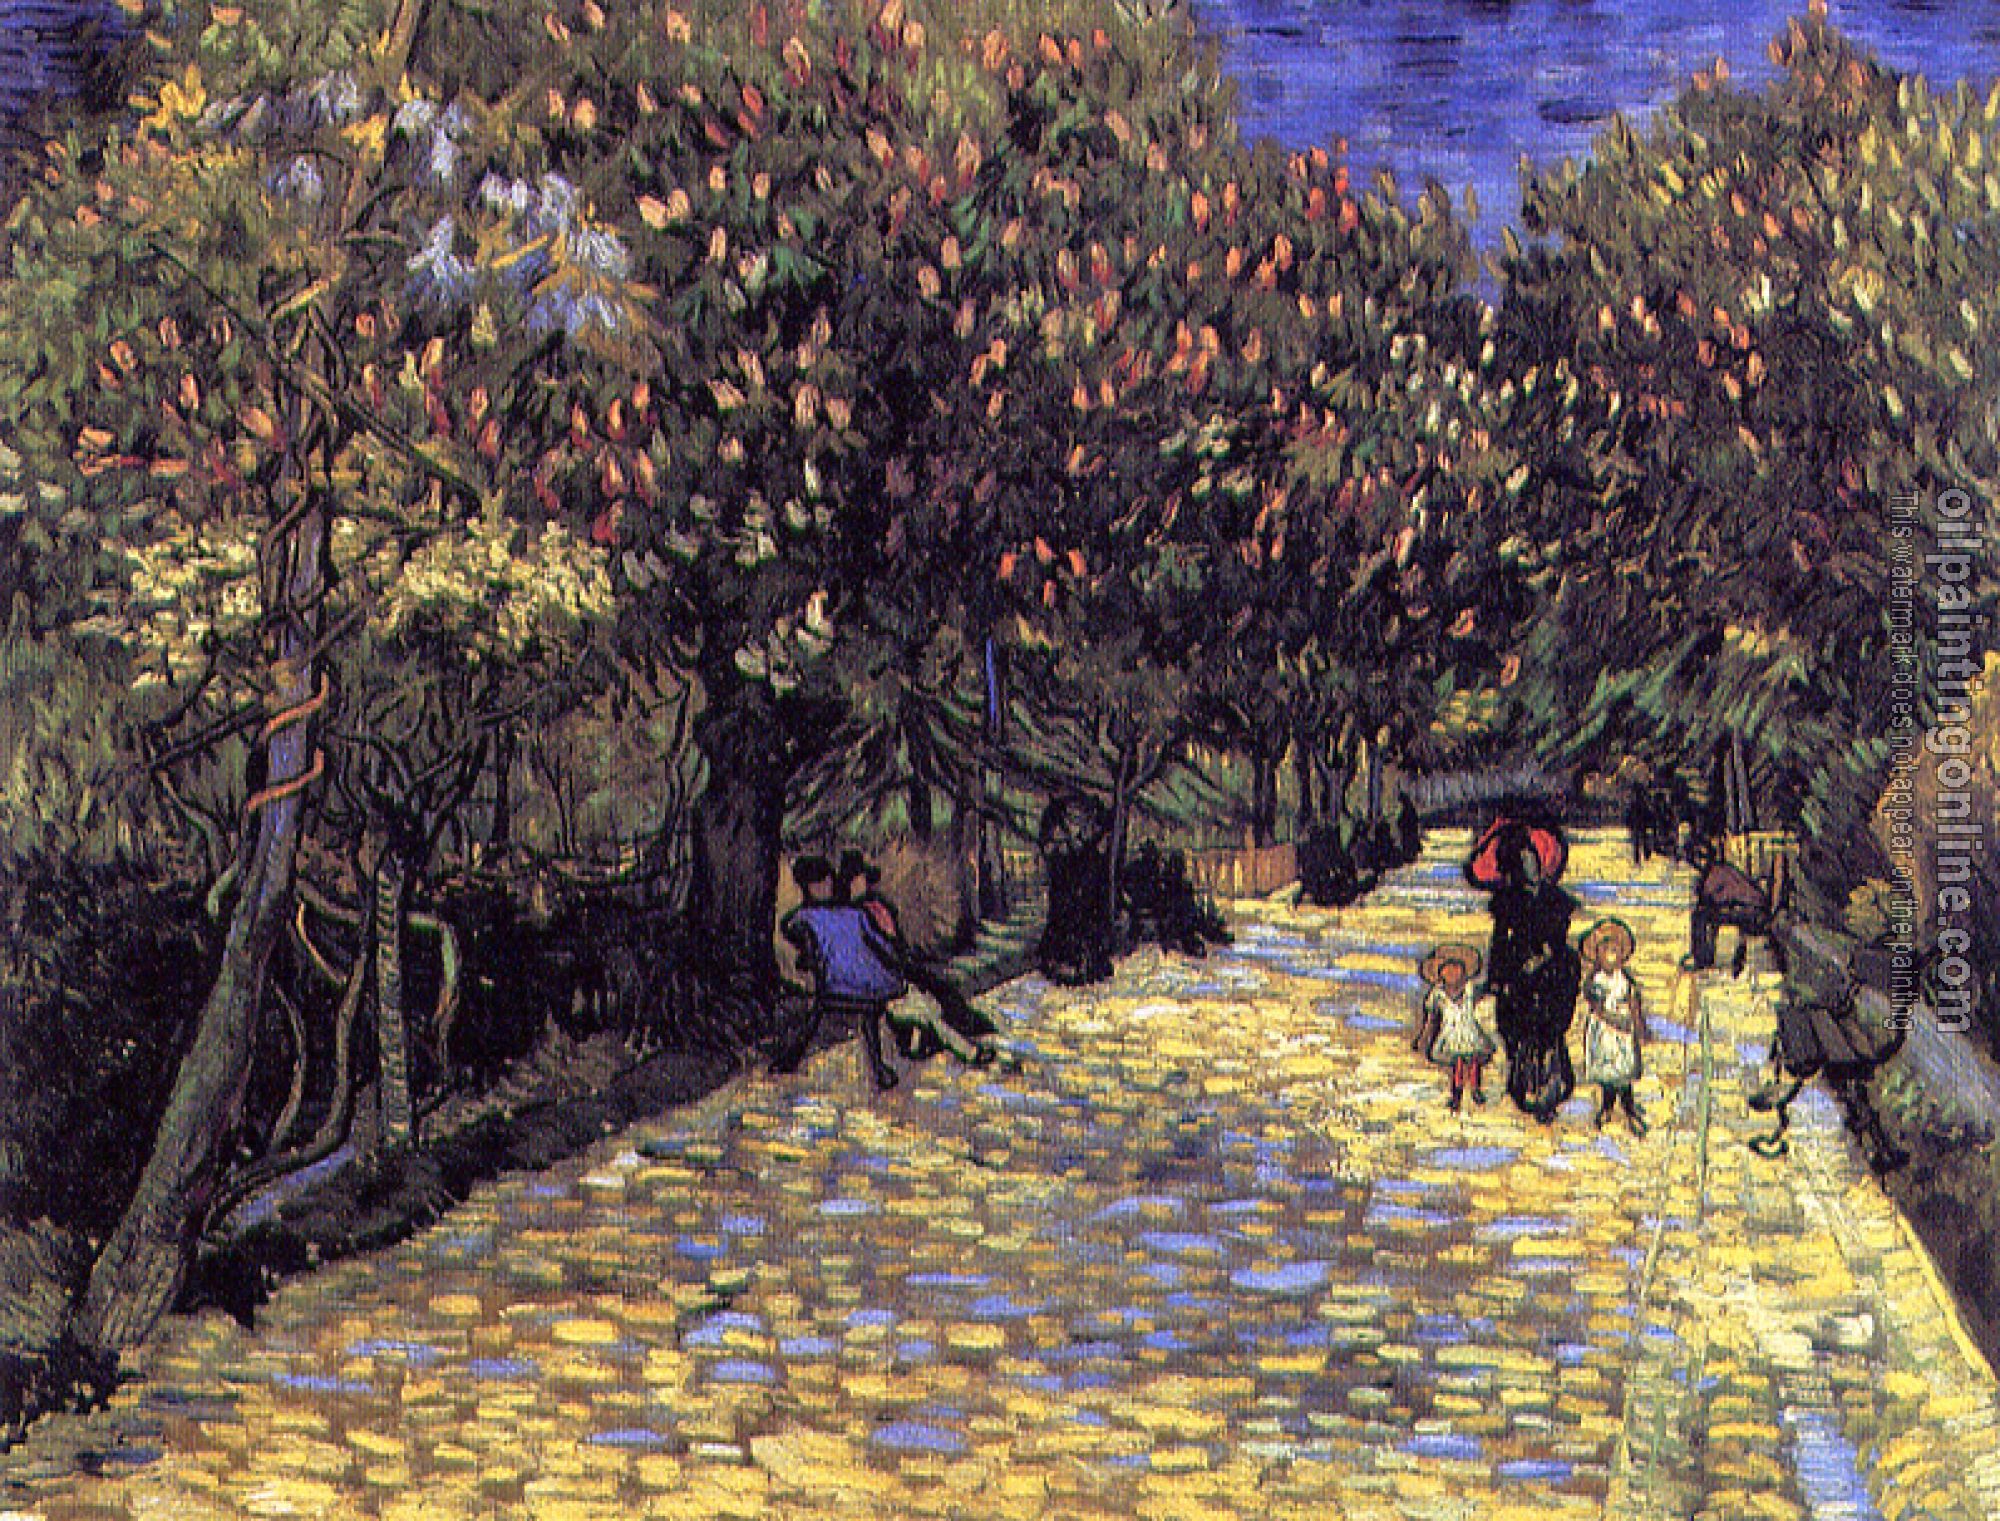 Gogh, Vincent van - Lane with Chestnut Trees in Bloom